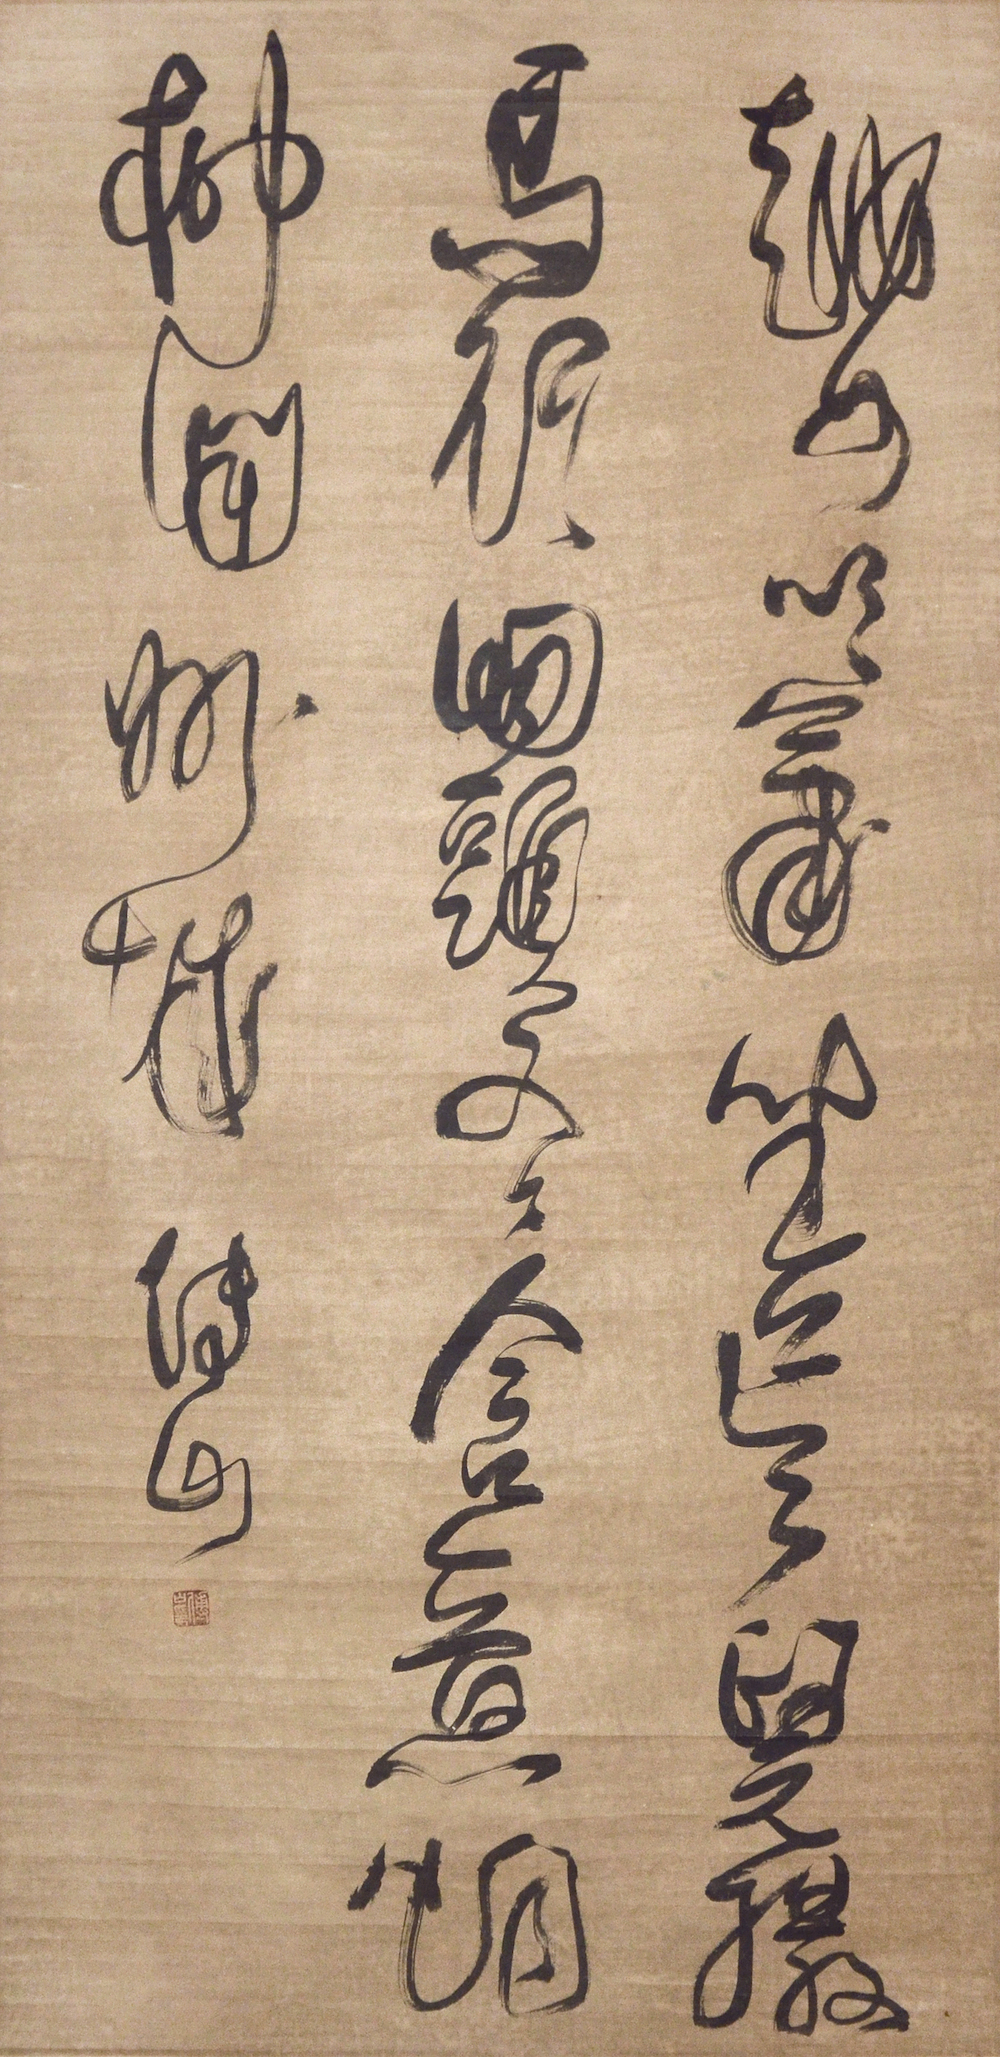 Running Script Calligraphy by Fu Shan (1607-1685) is an important historic link to contemporary ink. Lot 45. $50,000 - $80,000